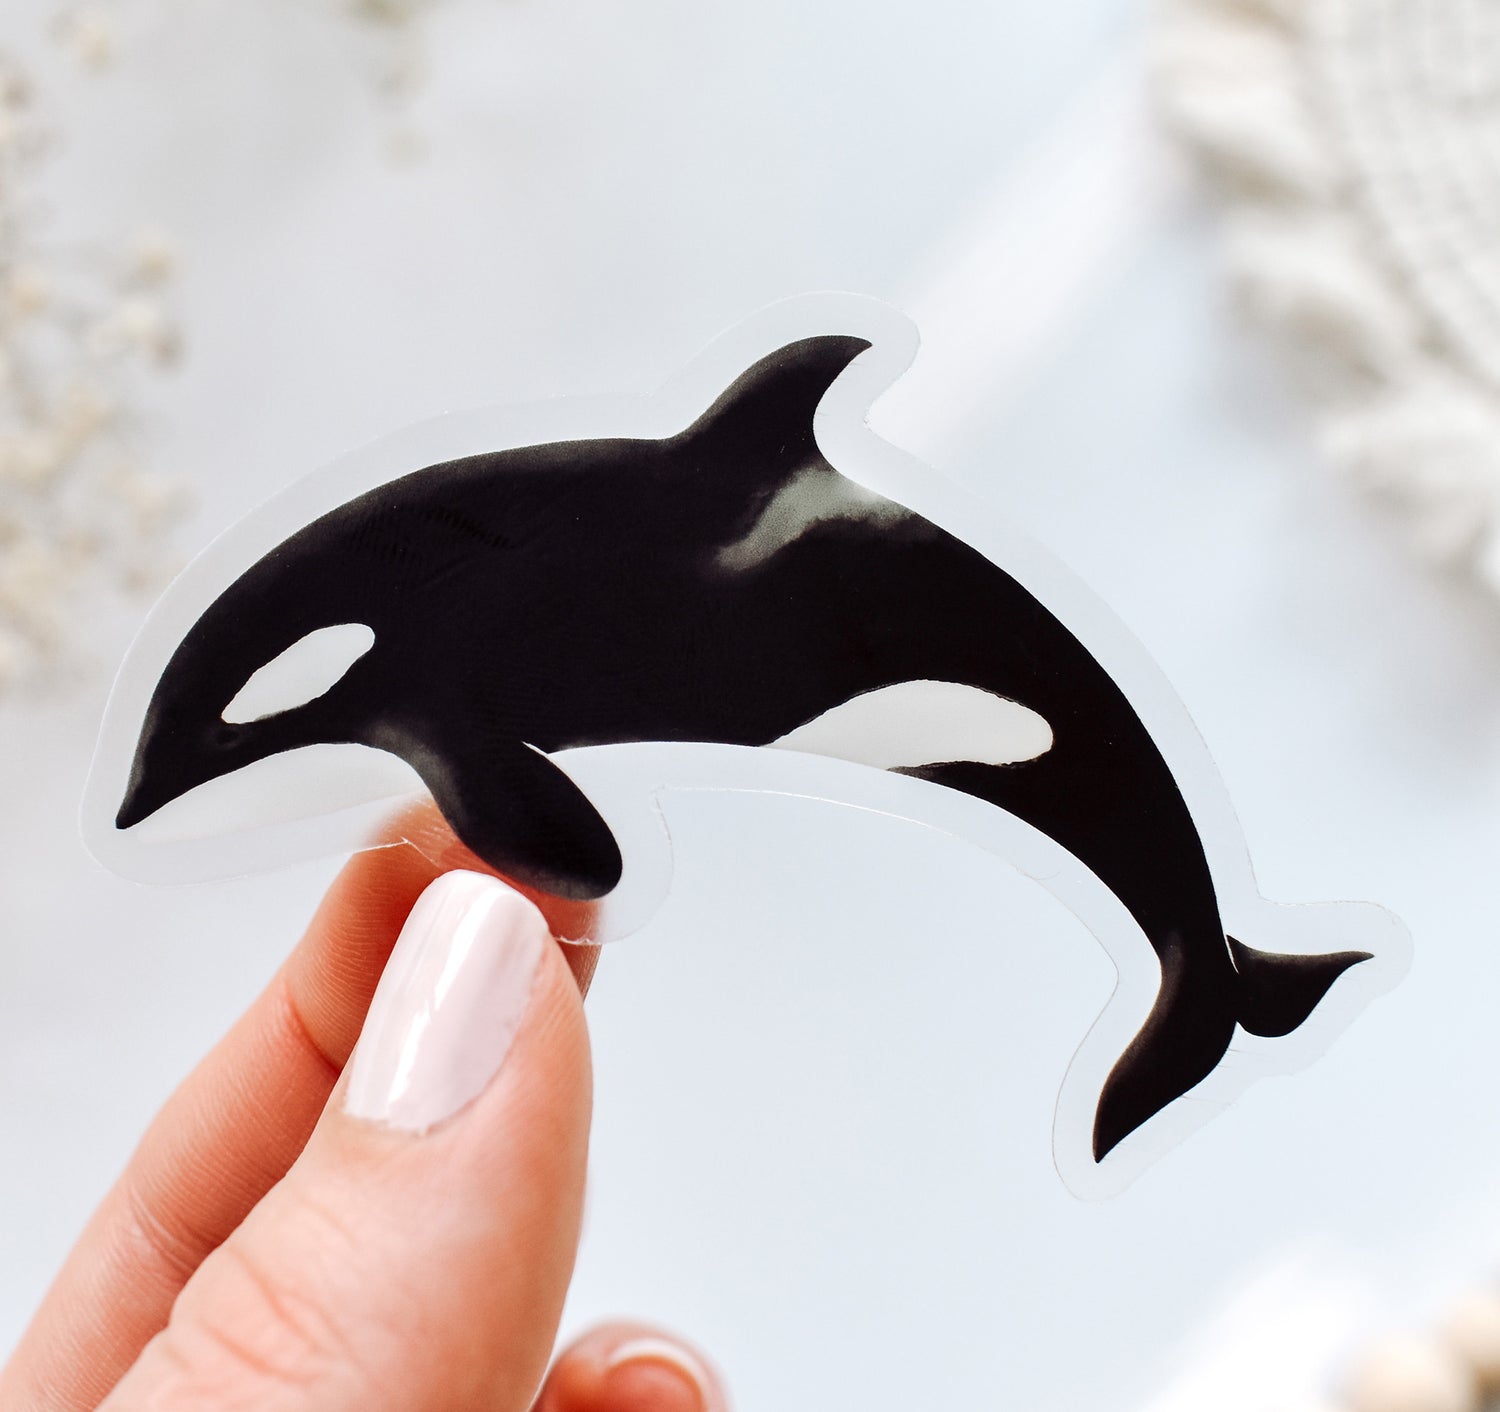 Clear vinyl ocean inspired sticker of an orca whale, also known as a killer whale